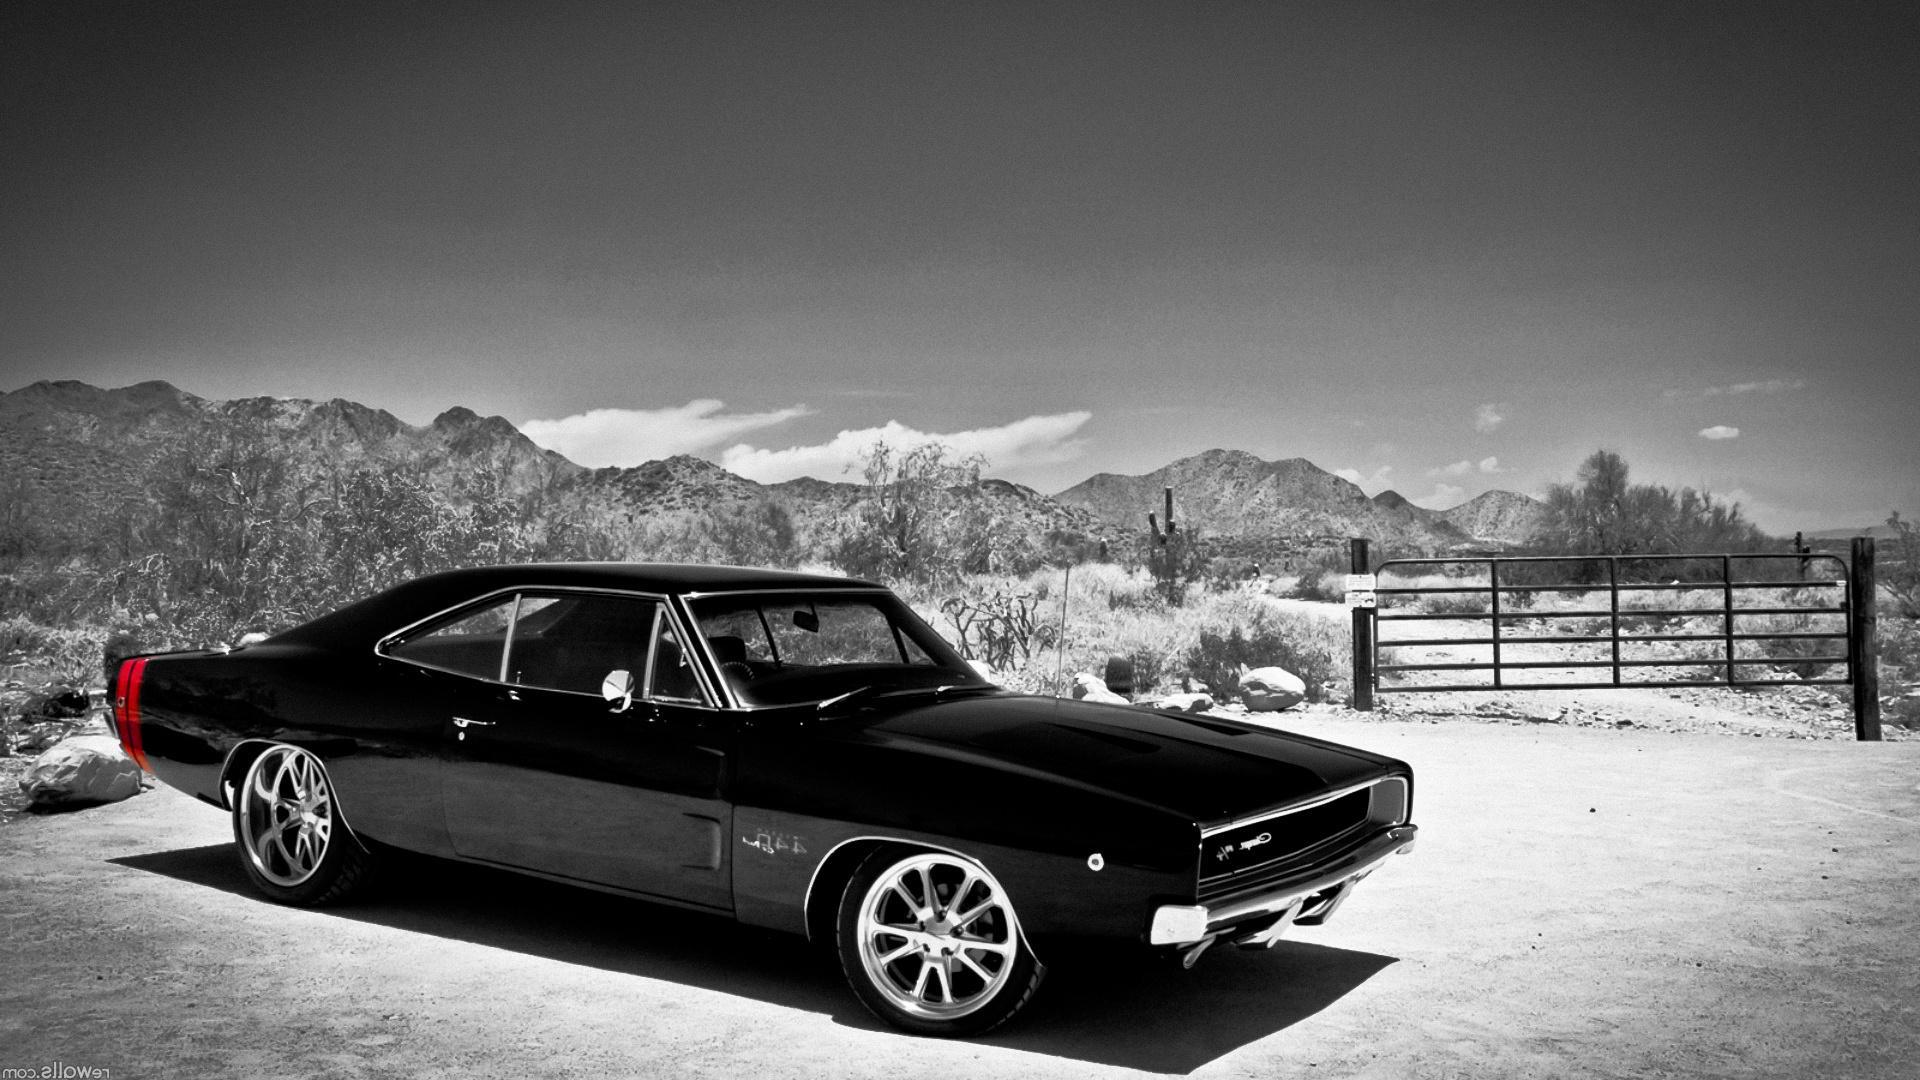 Dodge Charger HD Wallpapers Full HD Pictures